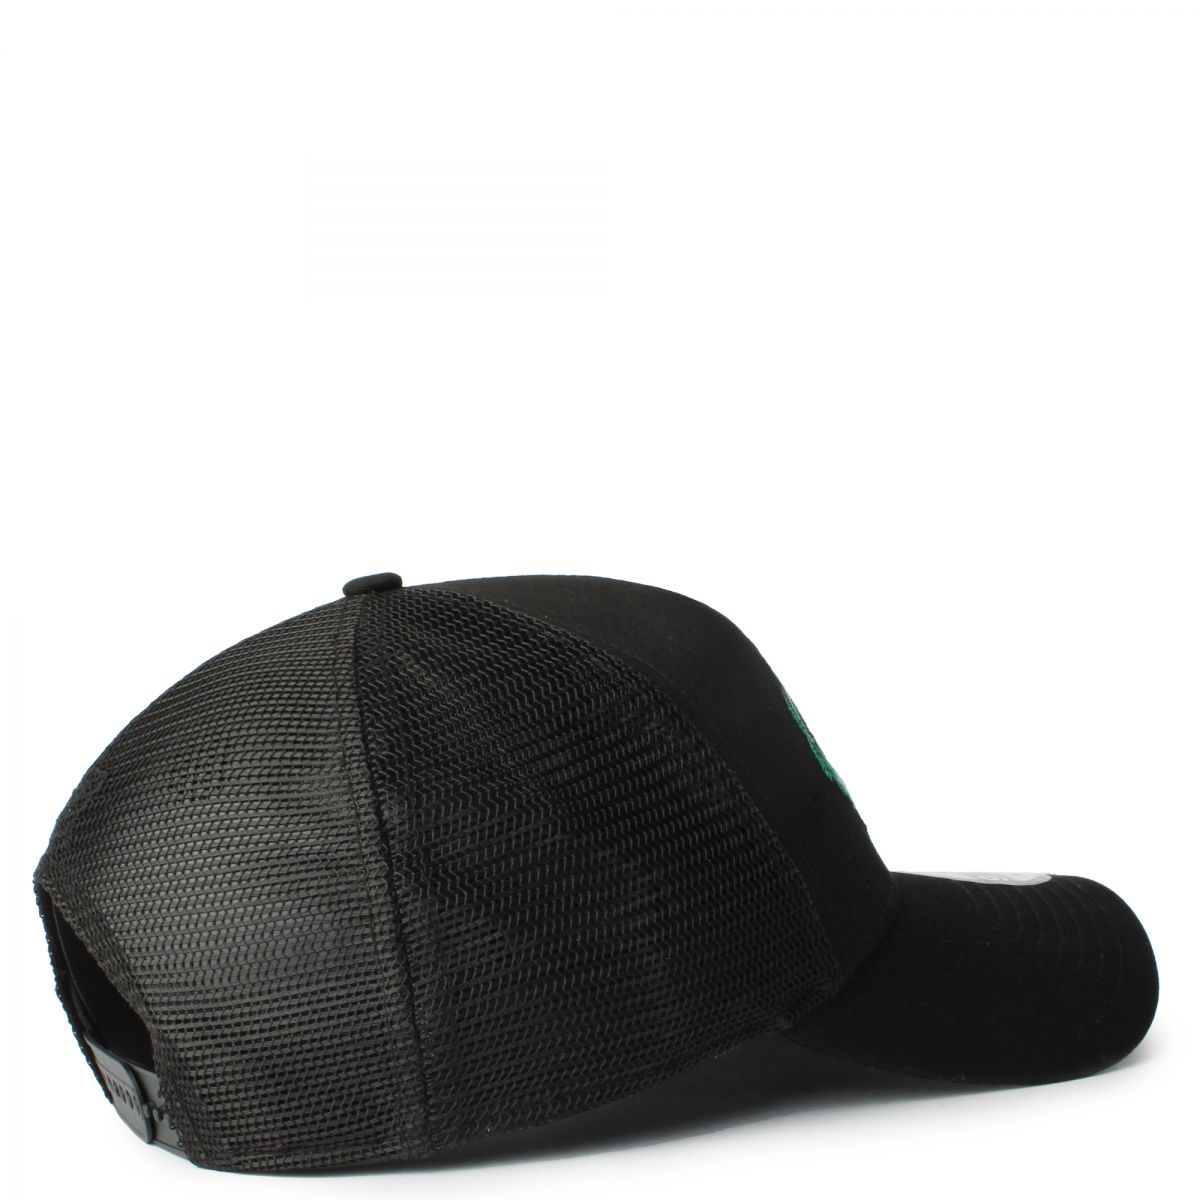 Drum and Bass Pro Trucker Cap Charcoal/ Black